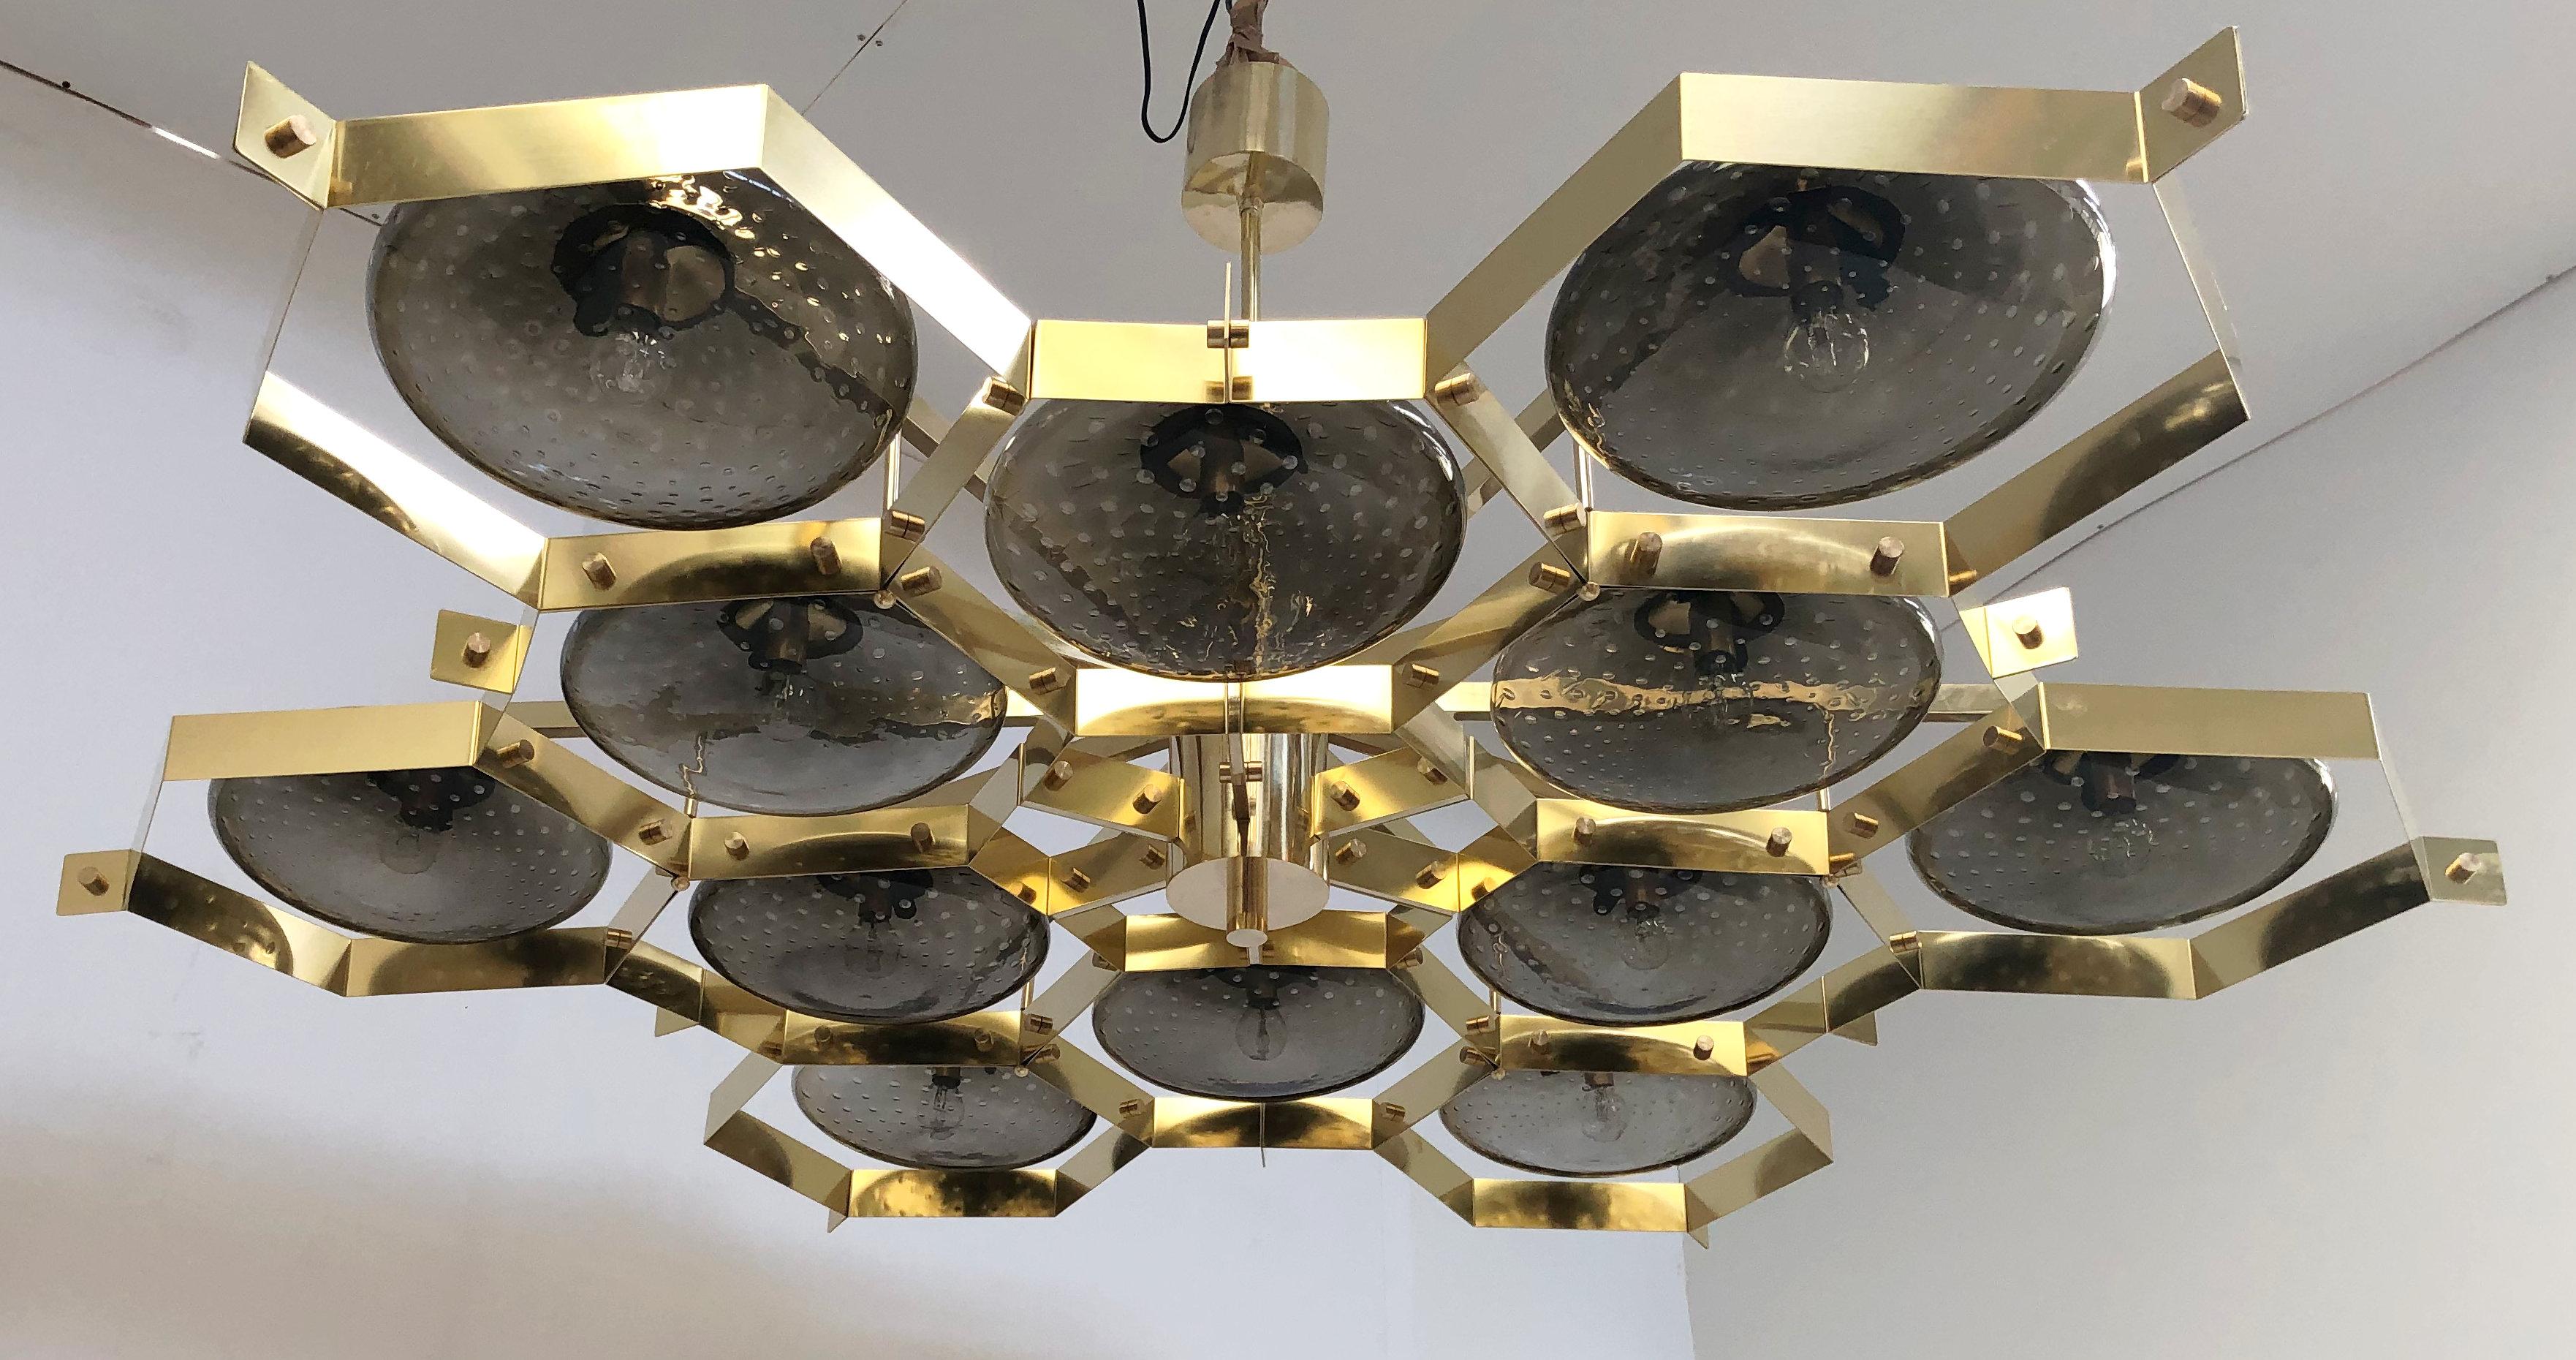 Italian chandelier with Murano glass shades mounted on solid brass frame / designed by Fabio Bergomi for Fabio Ltd / Made in Italy
12 lights / E12 or E14 type / max 40W each
Measures: Diameter 74 inches, height 30 inches
Order only / this item ships